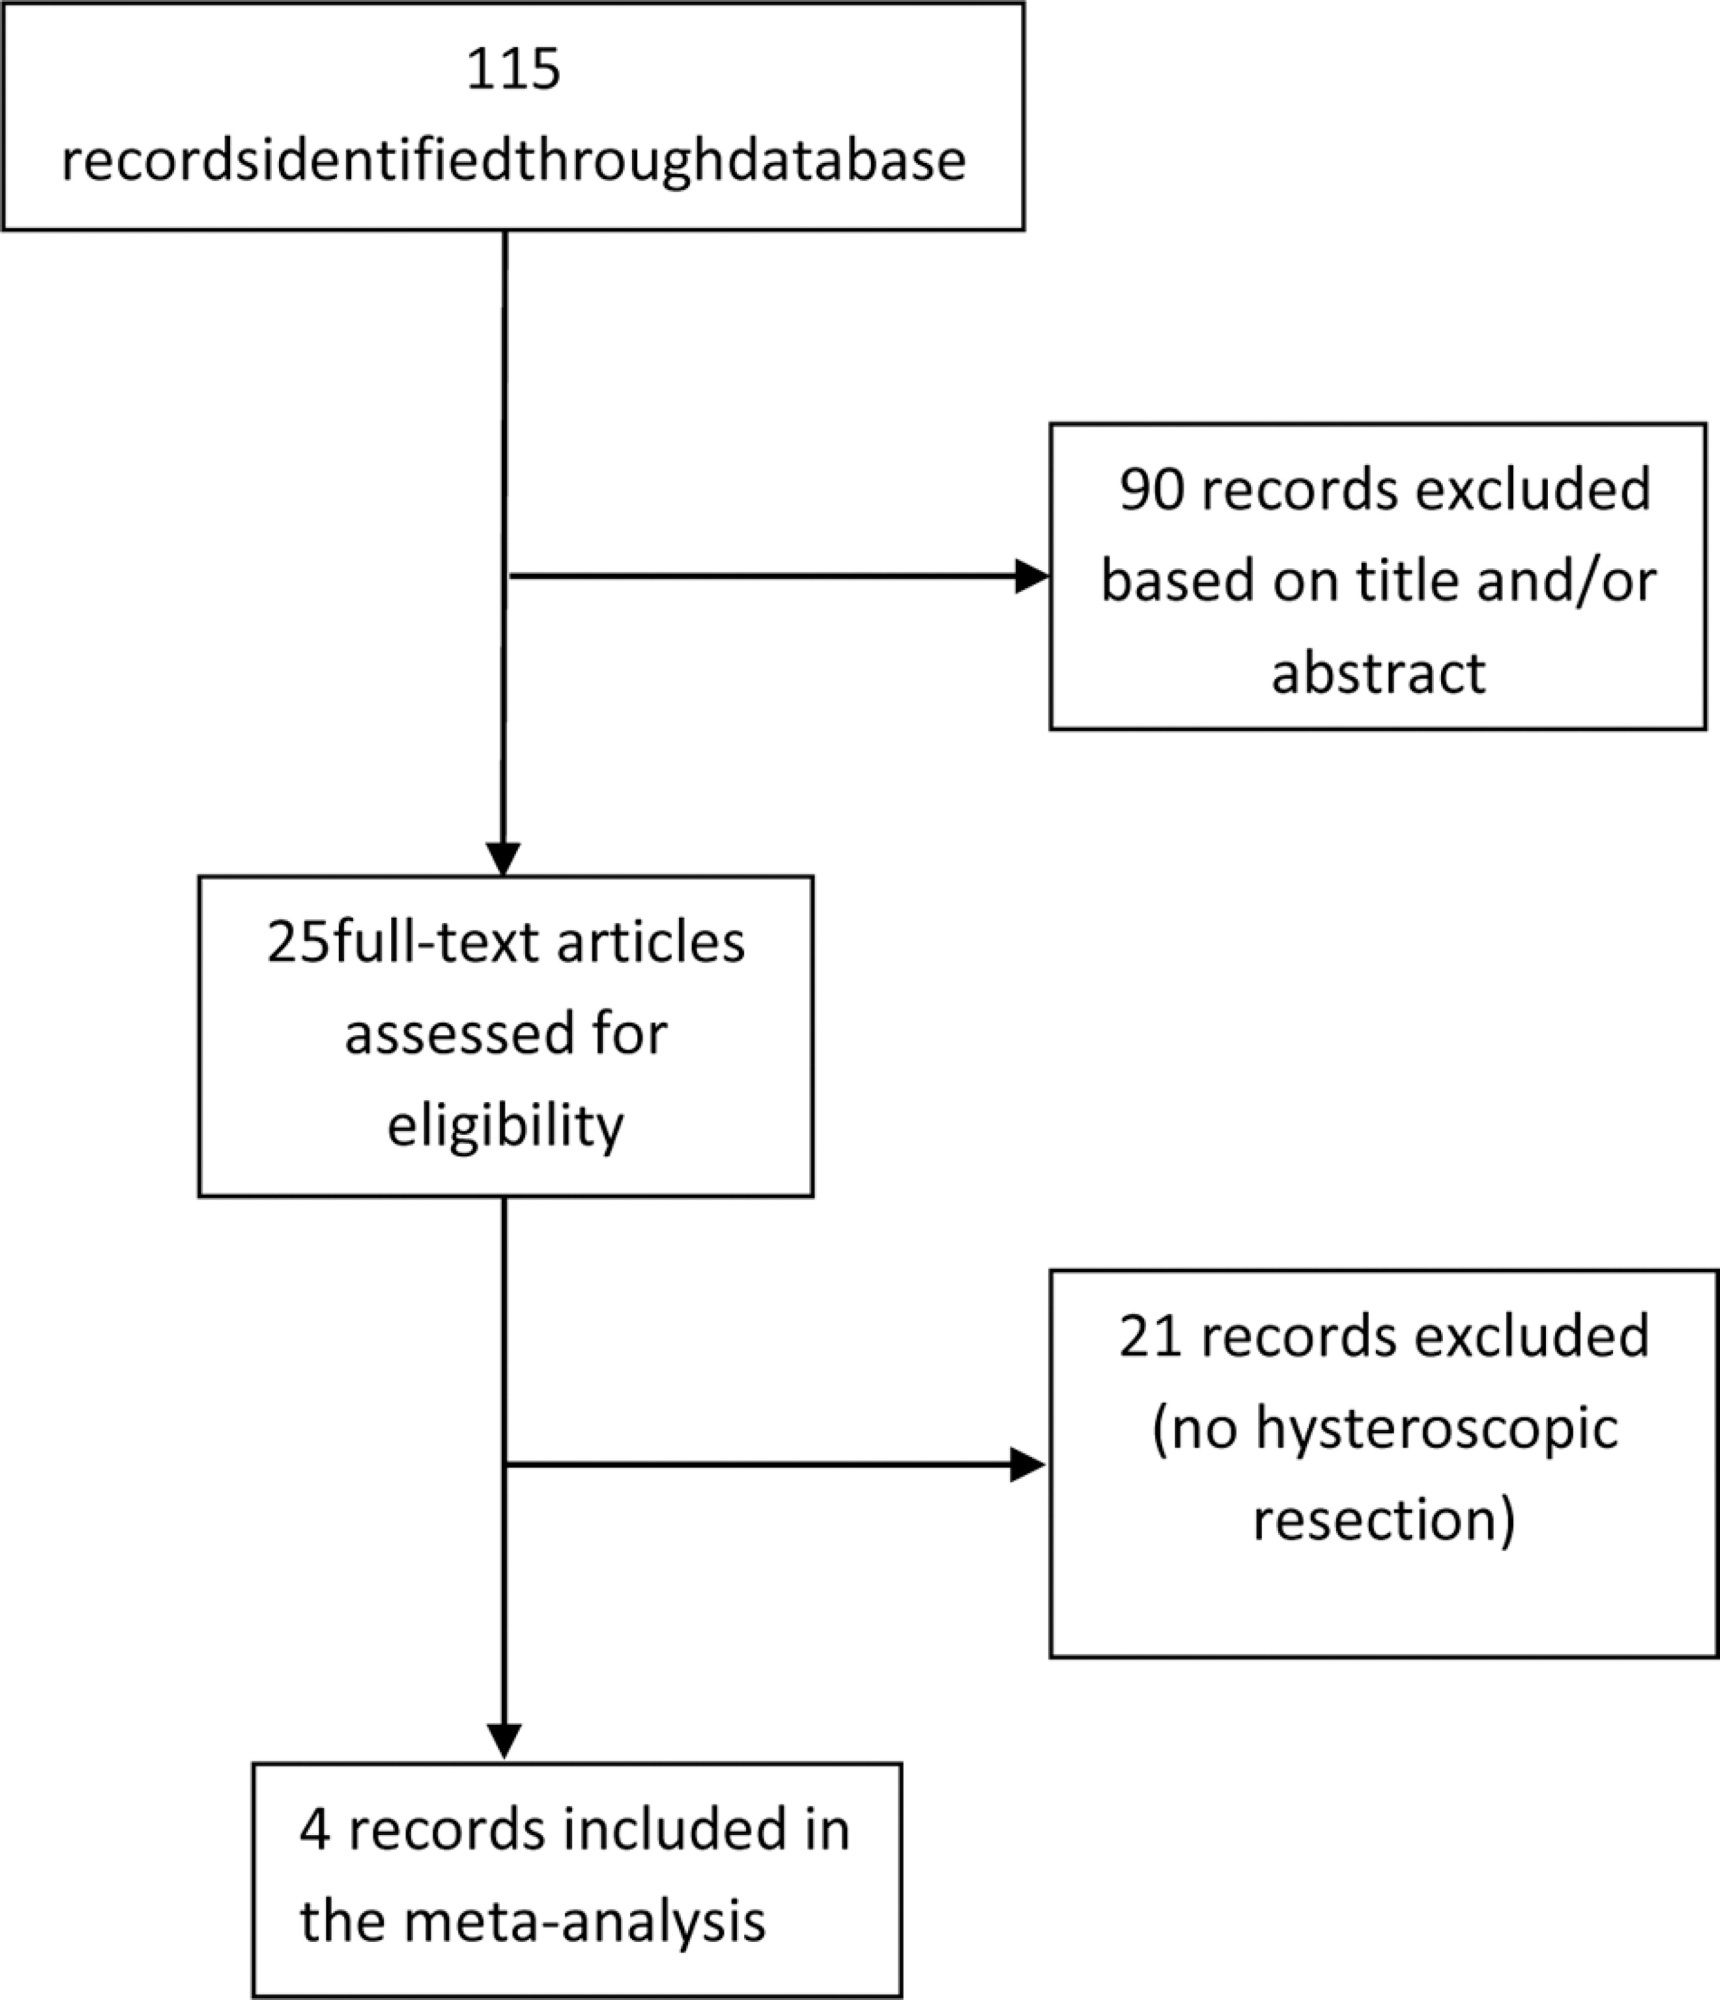 Use of GnRH Analogues in the Reduction of Submucous Fibroid for Surgical Hysteroscopy: A Systematic Review and Meta-Analysis